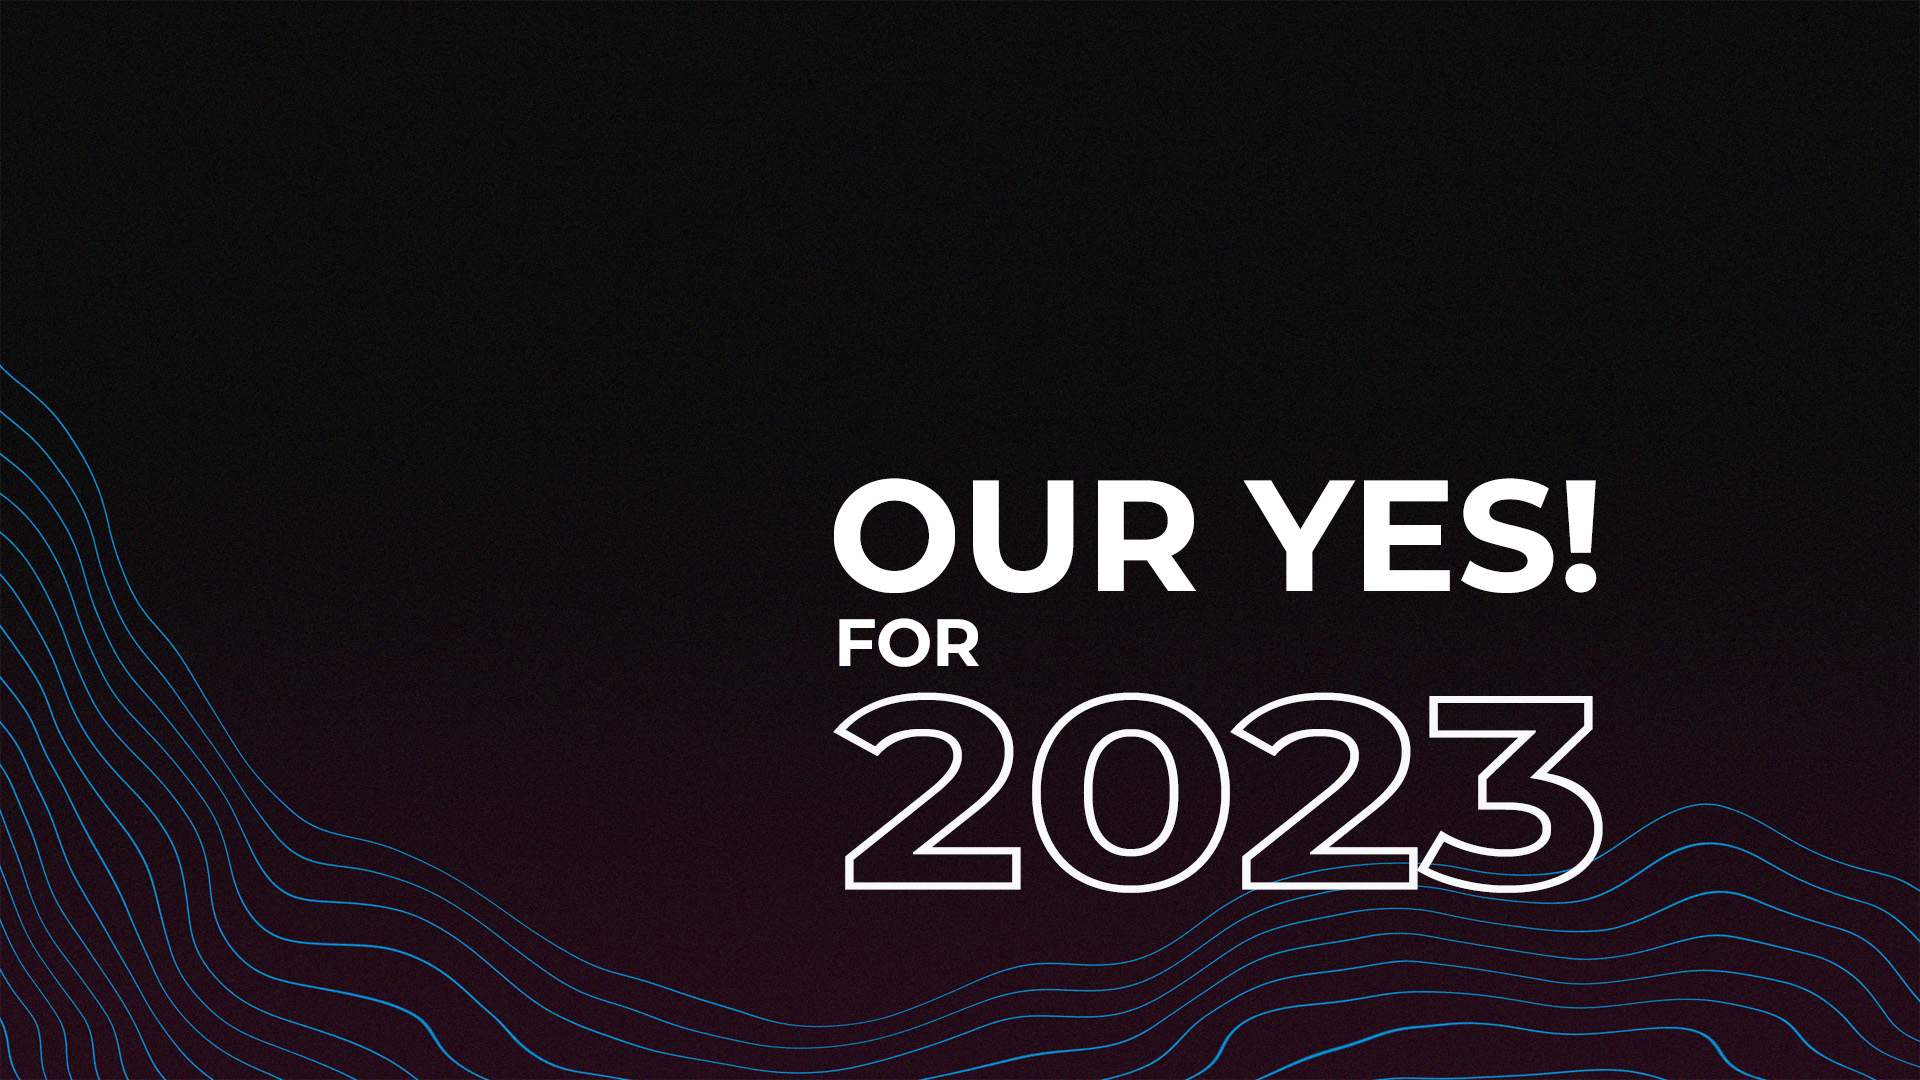 Our Yes For 2023!